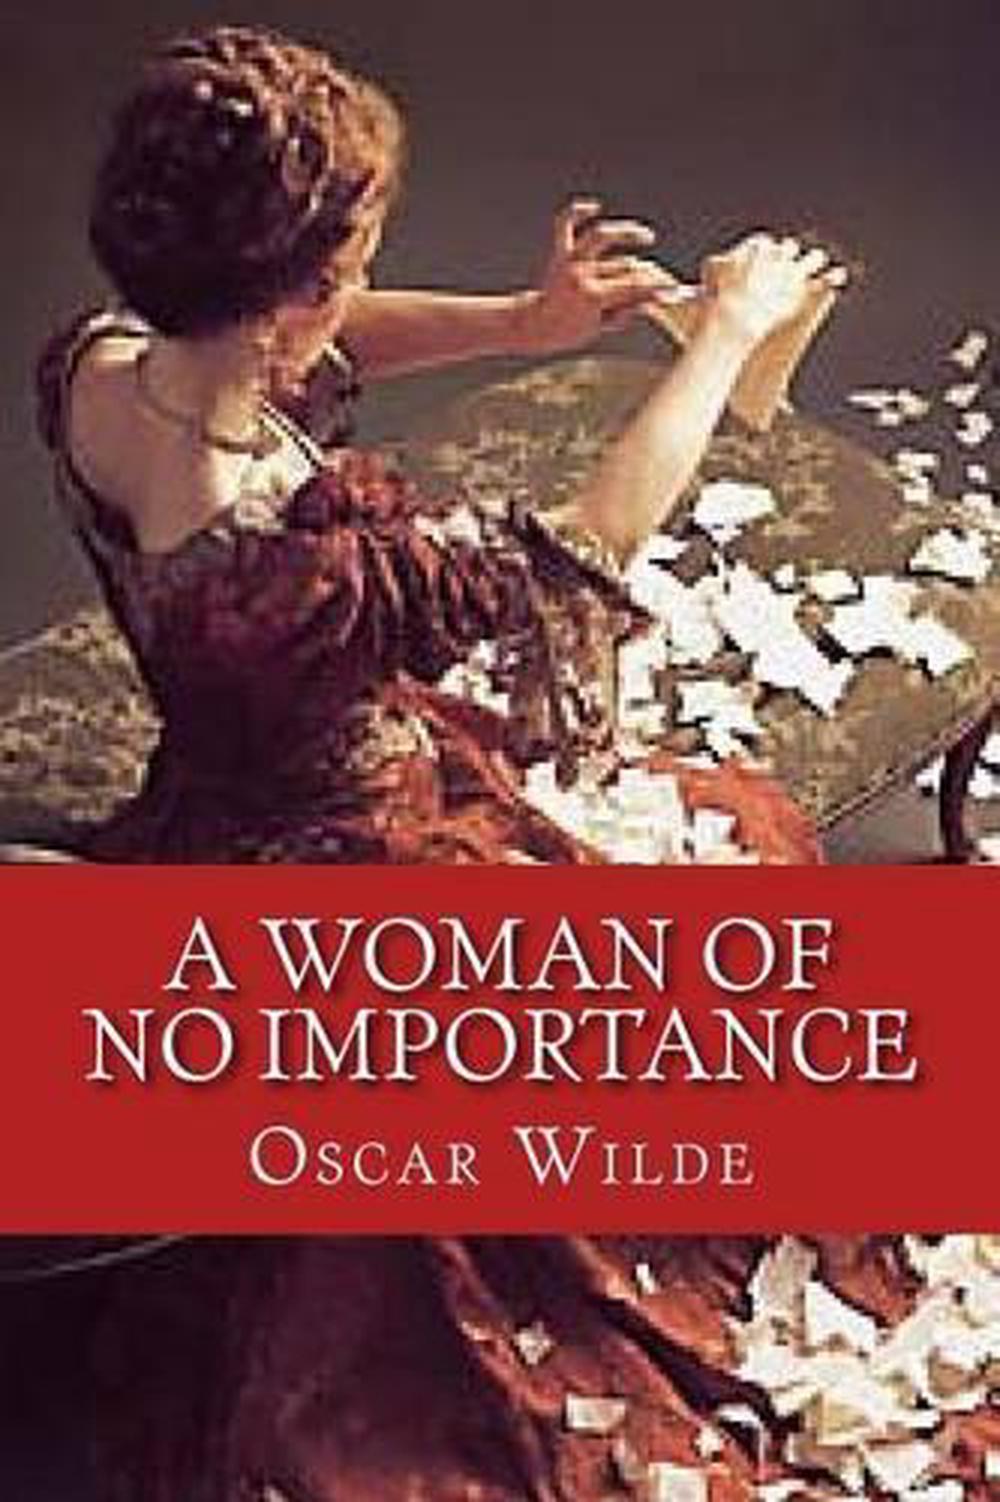 book review a woman of no importance